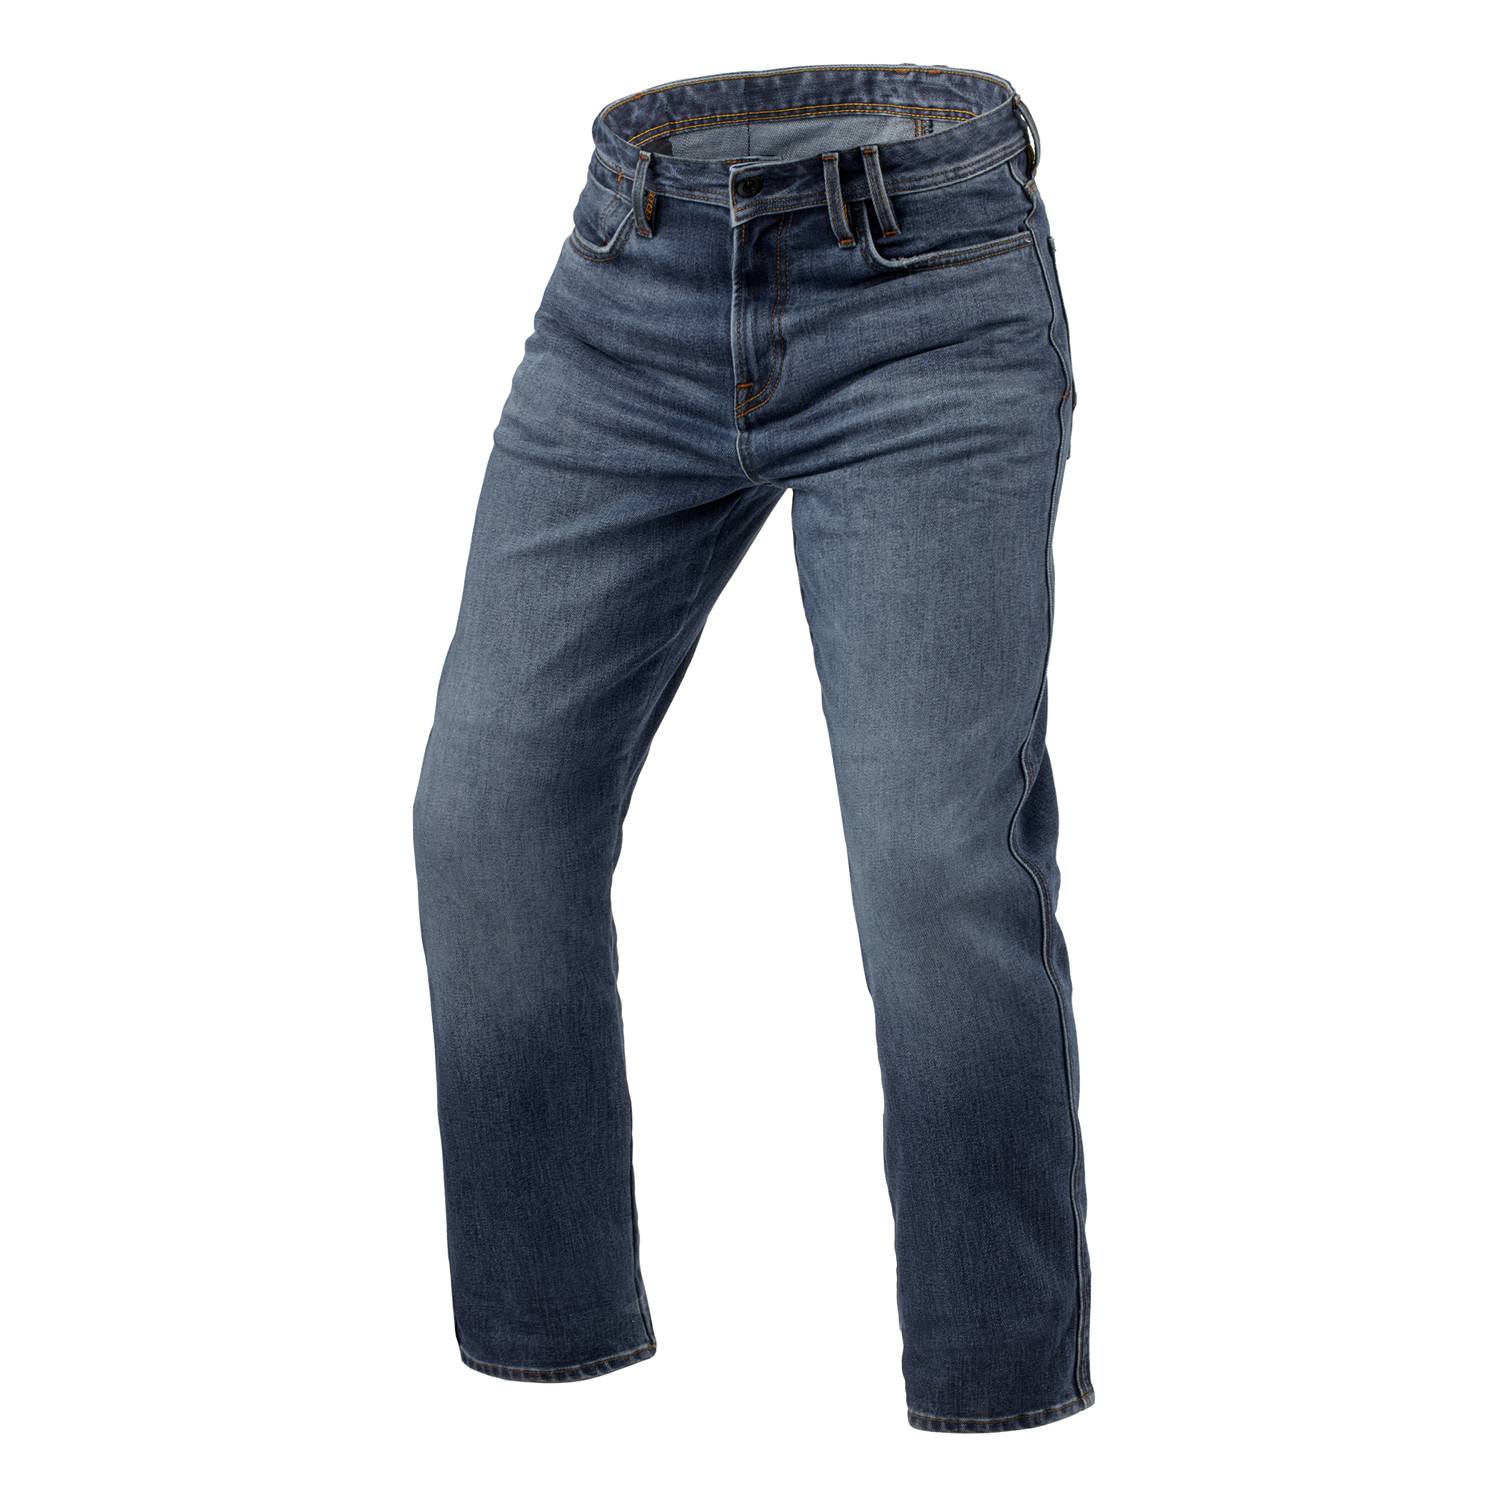 Image of REV'IT! Jeans Lombard 3 RF Mid Blue Stone L32 Motorcycle Jeans Size L32/W30 ID 8700001376020